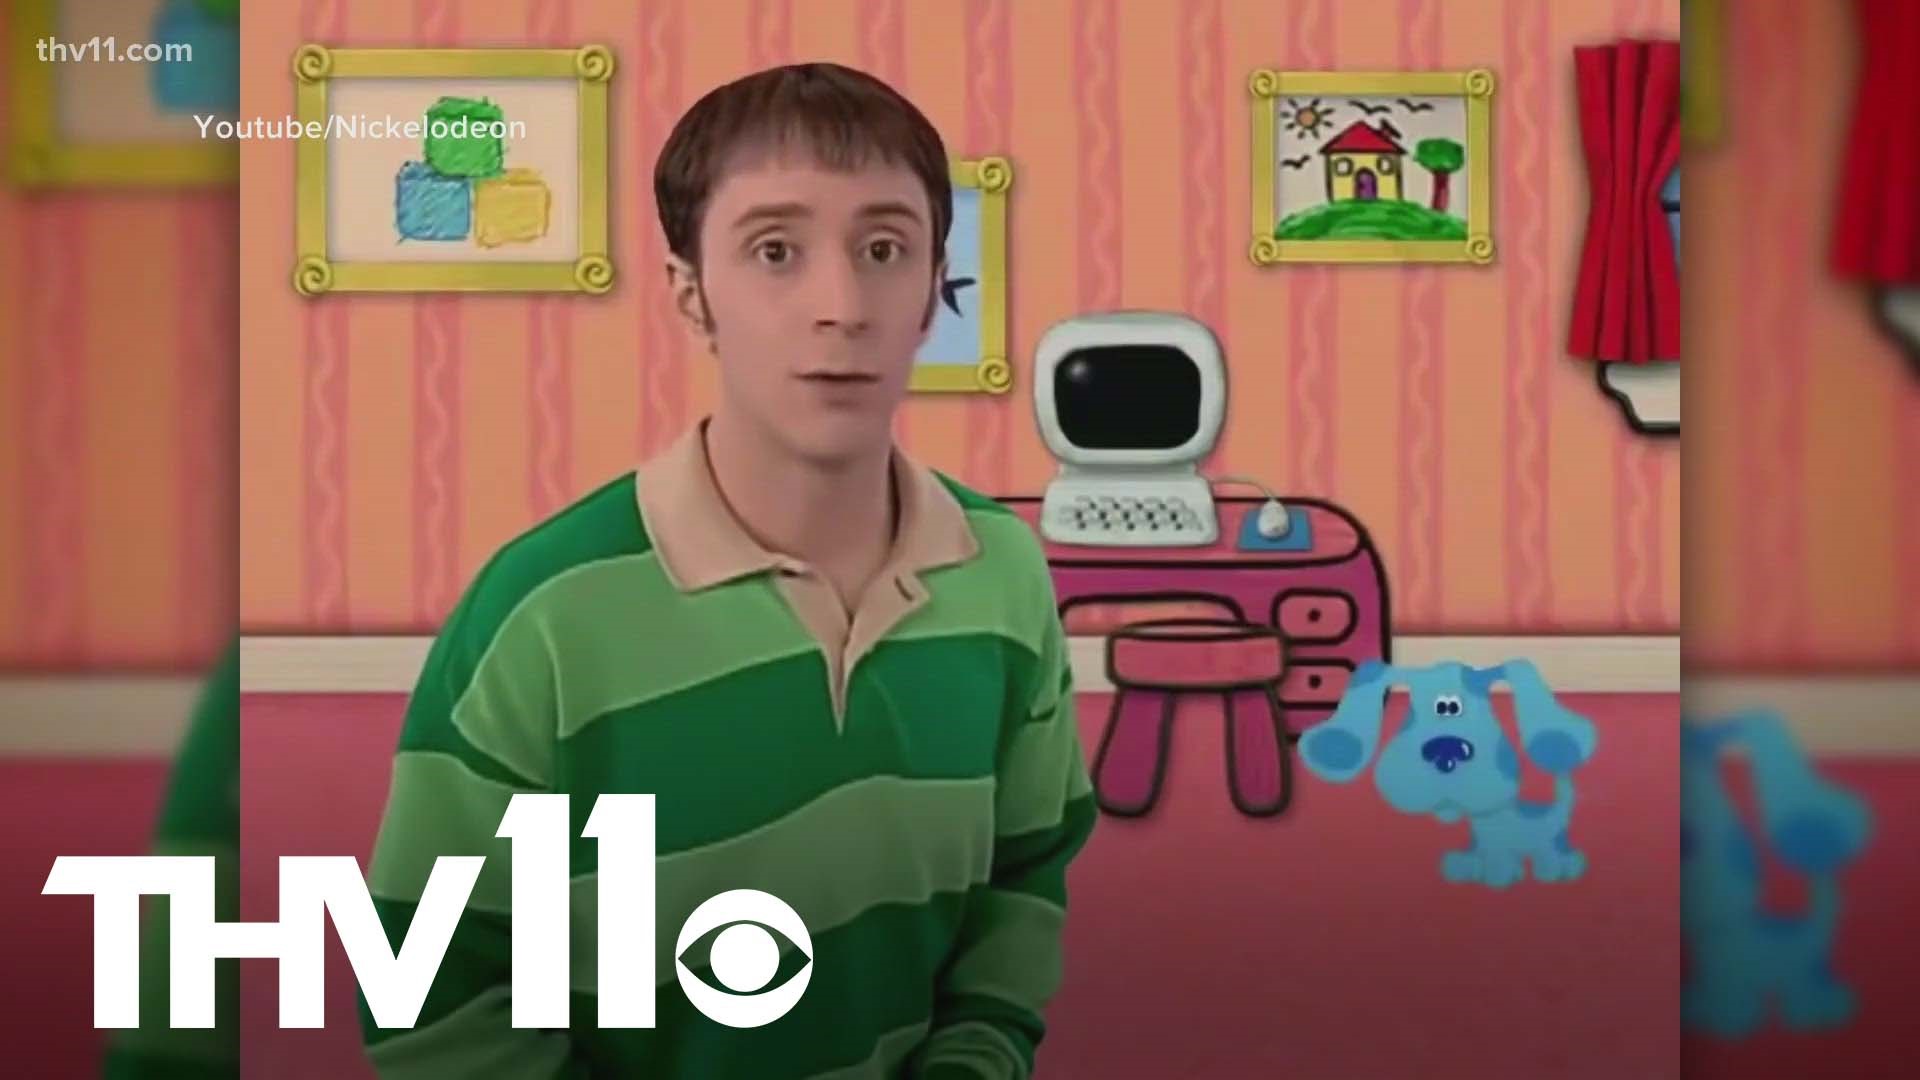 On Tuesday, April 4, the original host of the show Blue's Clues will give a talk at UCA in Conway.